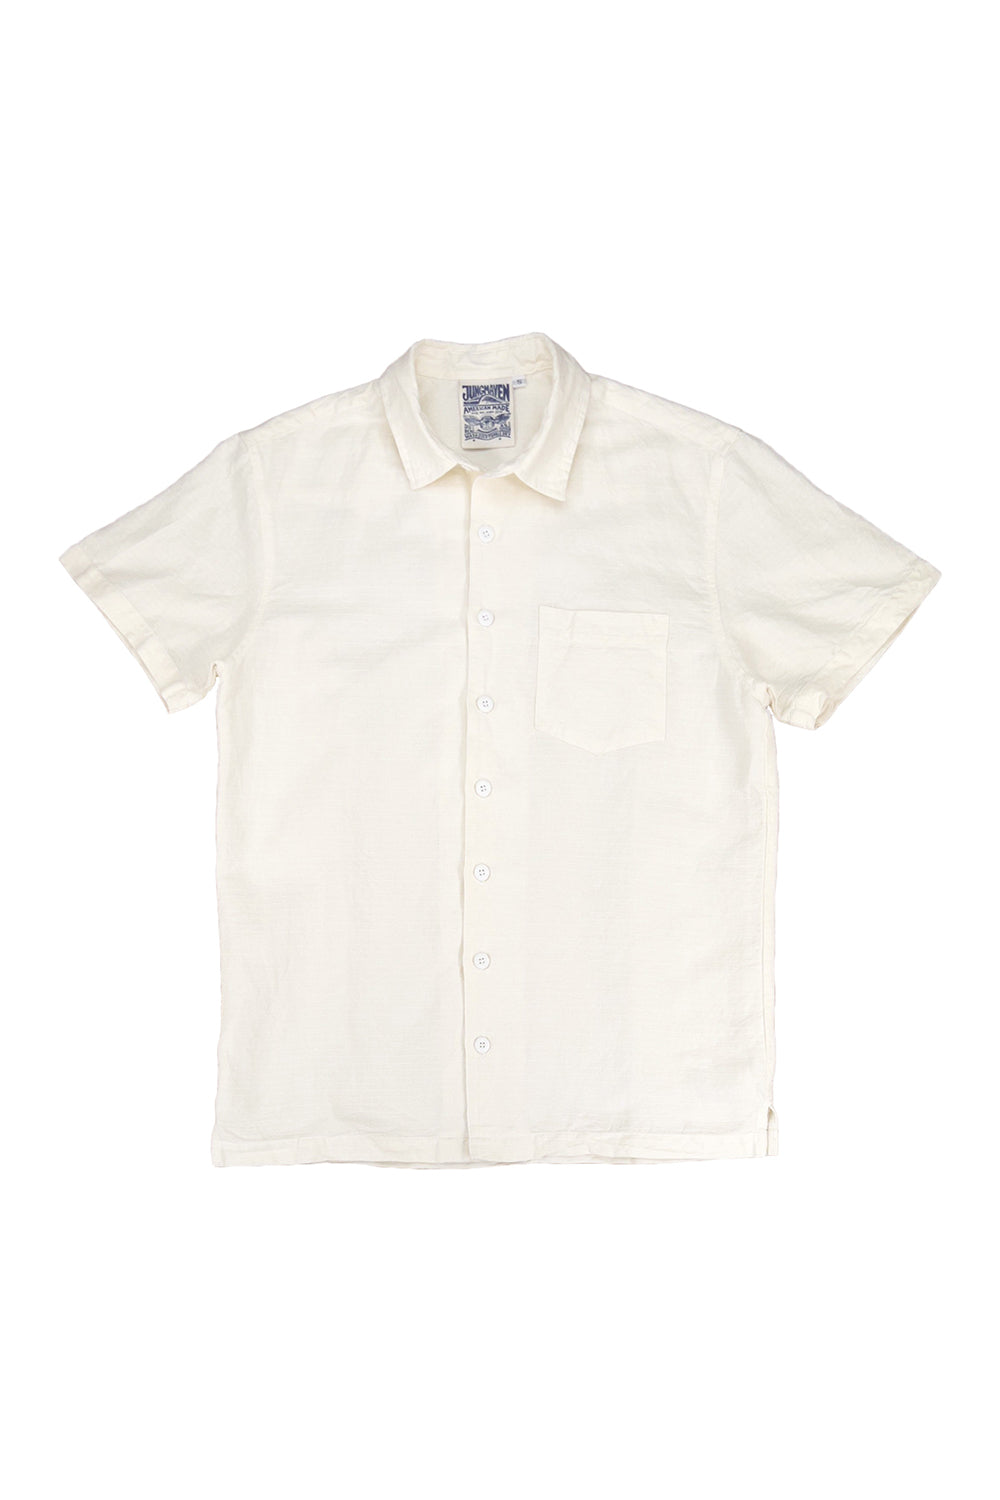 Rincon Shirt | Jungmaven Hemp Clothing & Accessories / Color: Washed White